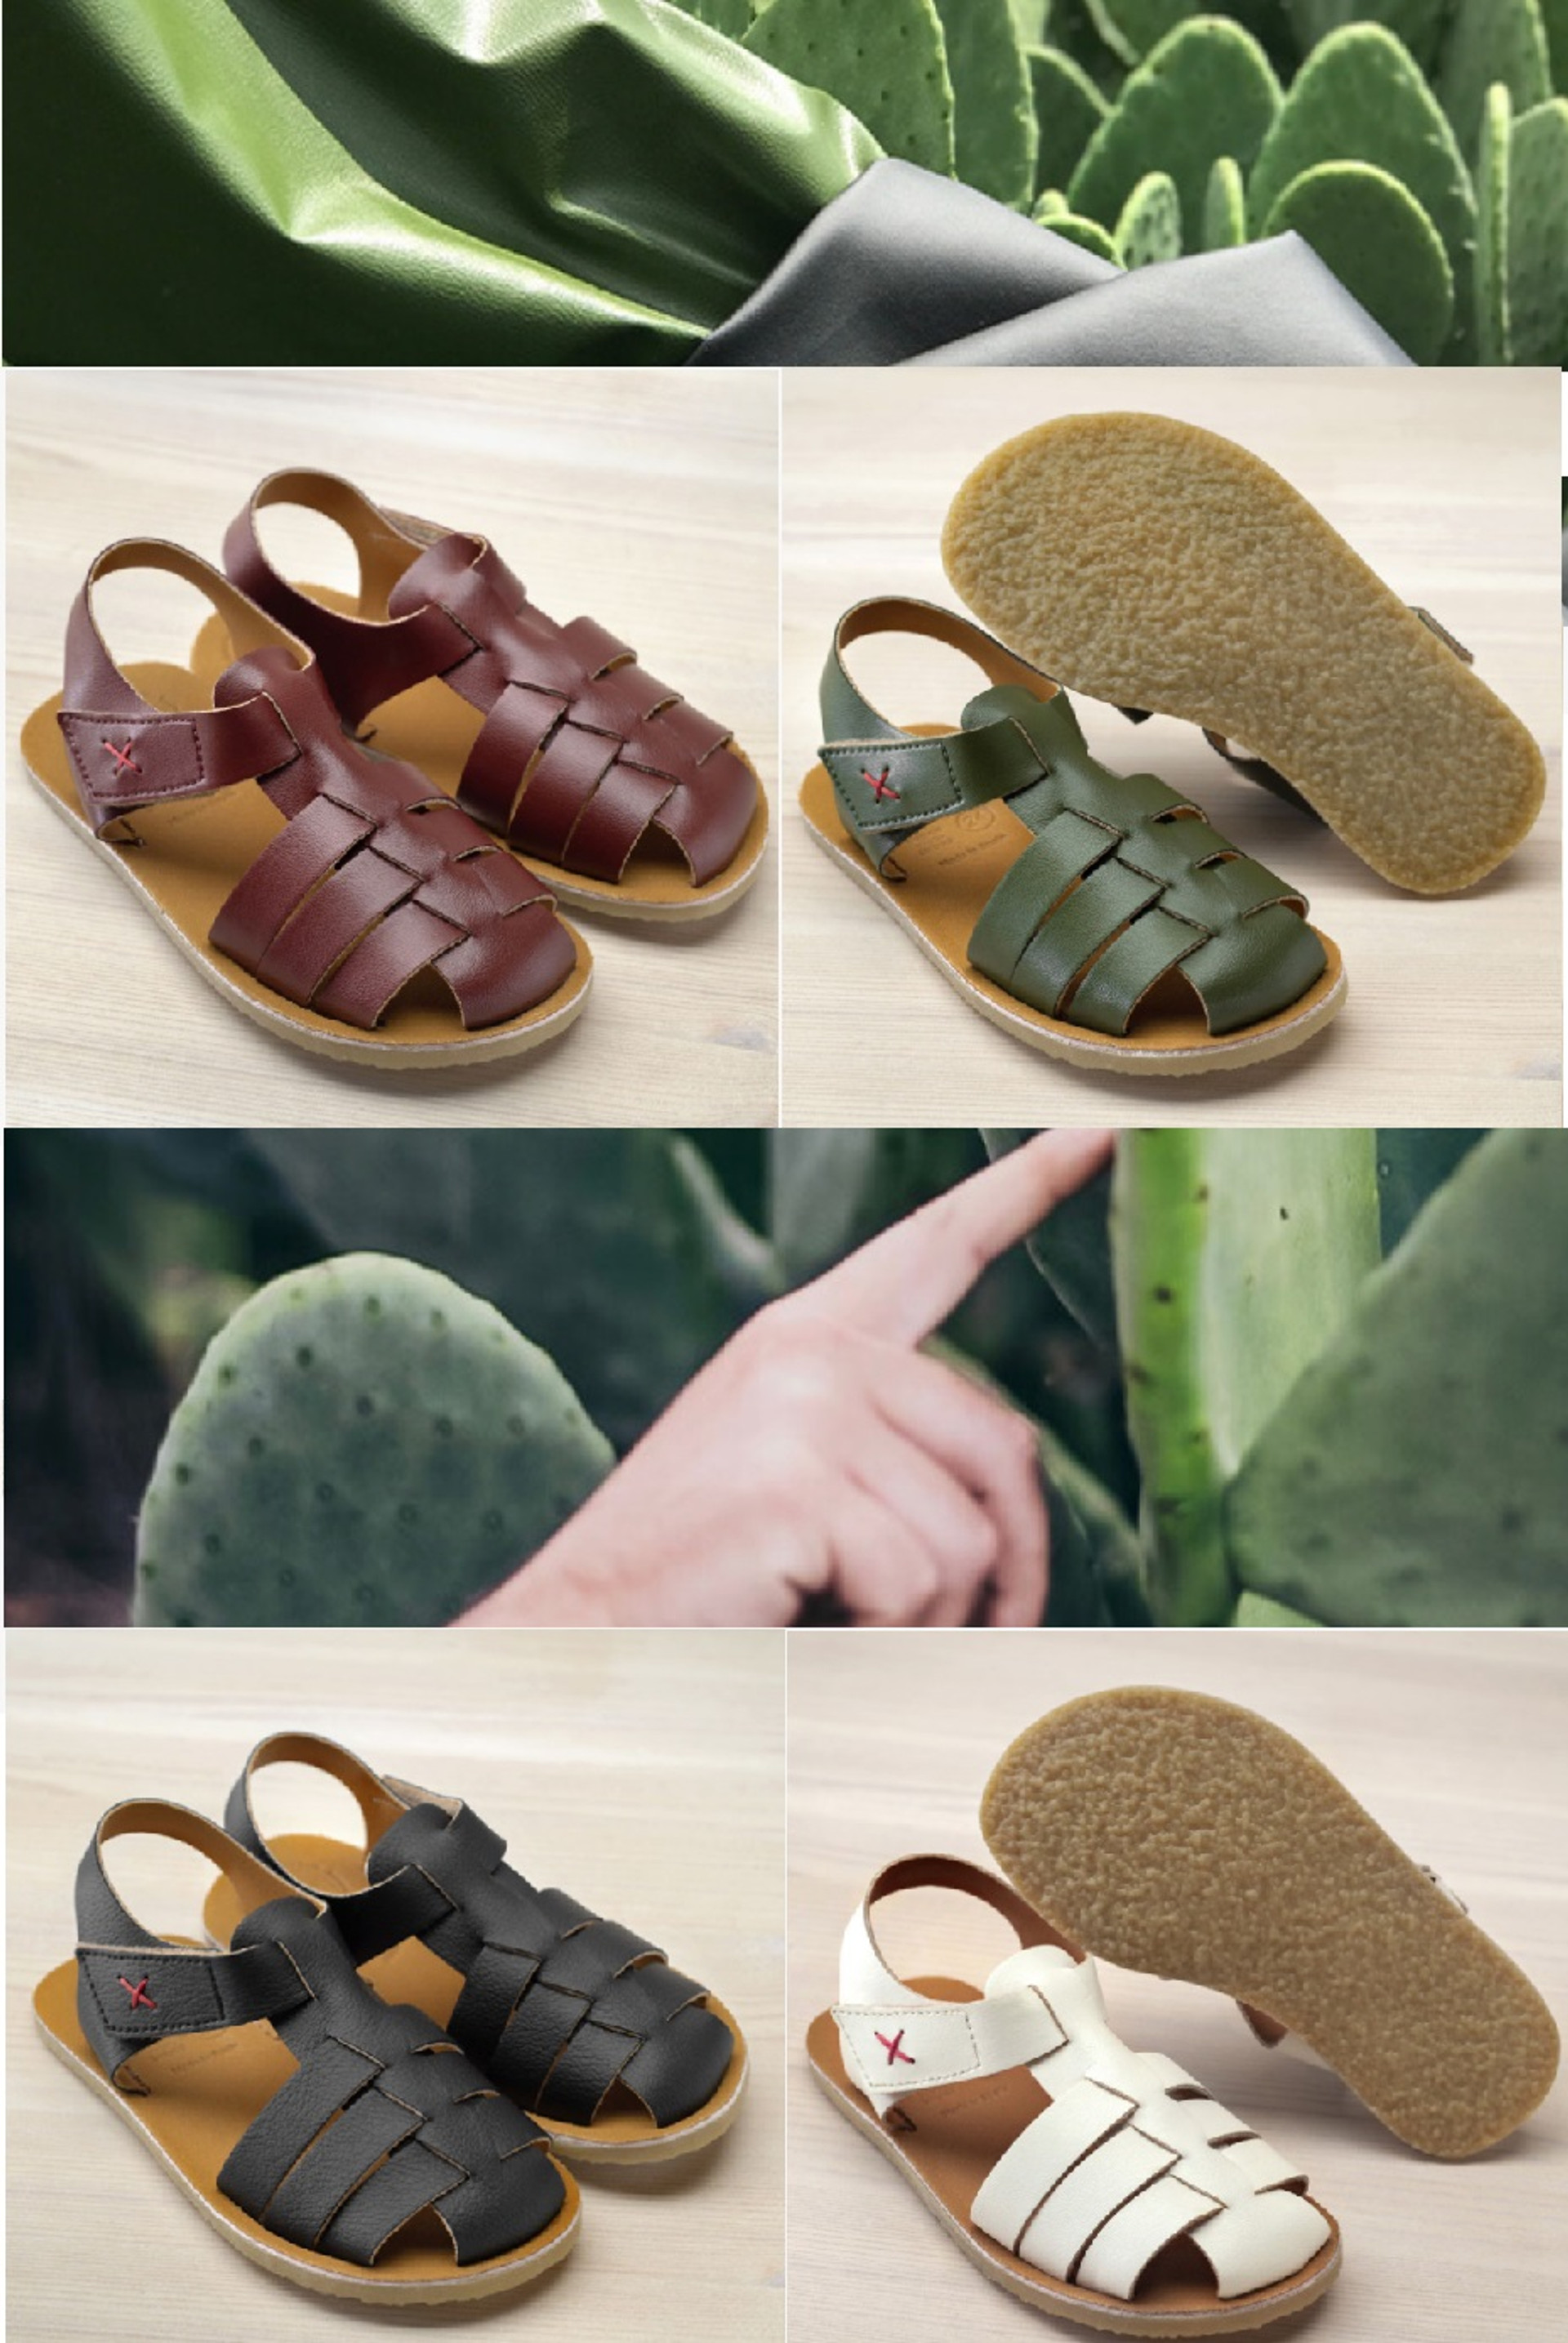 Kids - Booties, Slippers, & Shoes - Page 1 - Little Spruce Organics